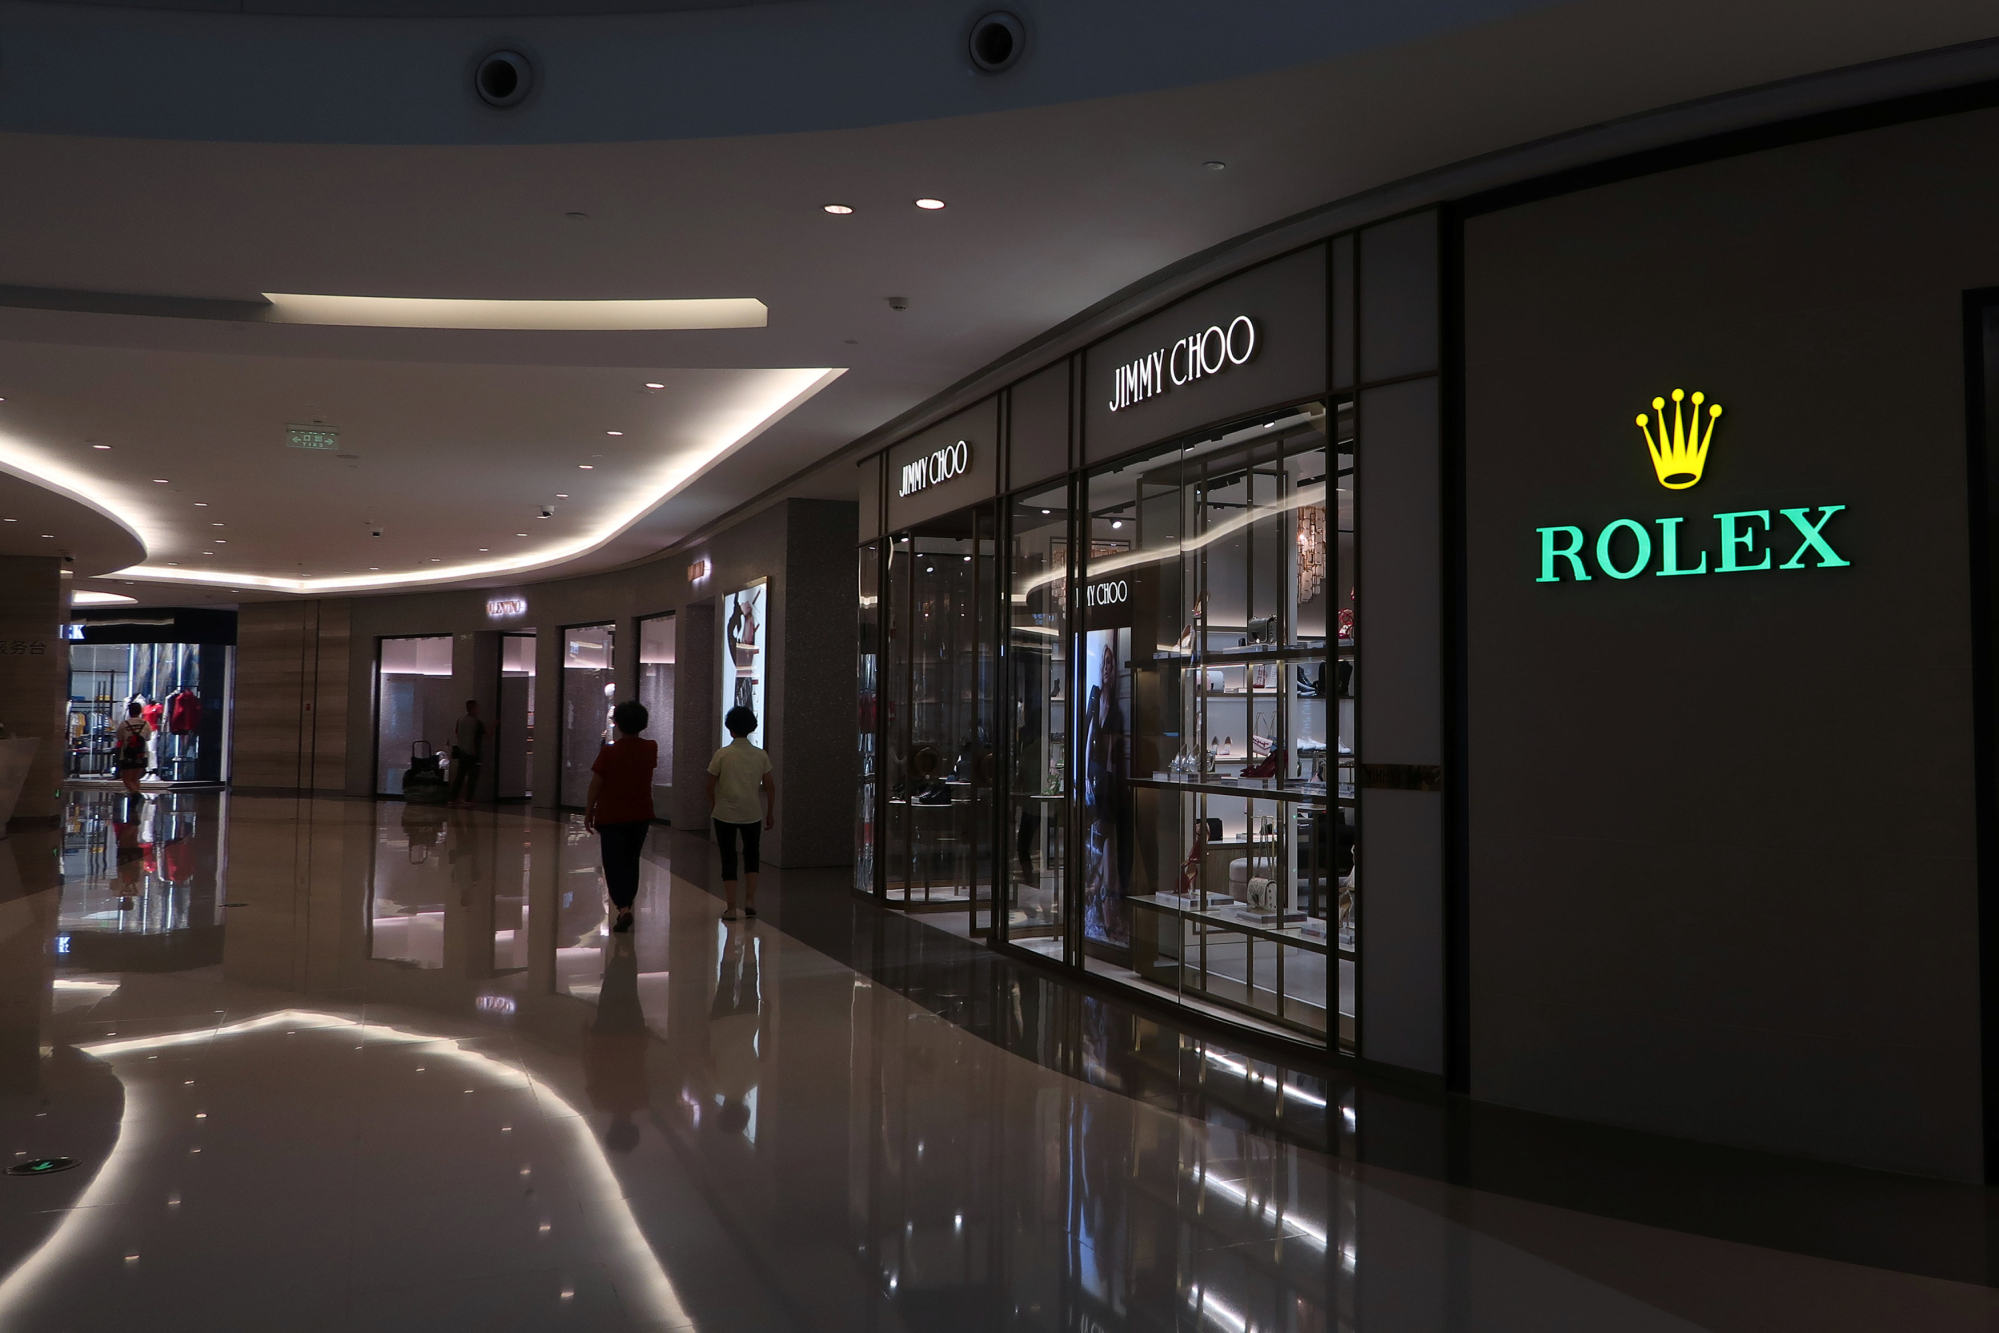 Chinese reseller ZZER buying up used Rolexes, Hermes Birkin bags during  economic slowdown